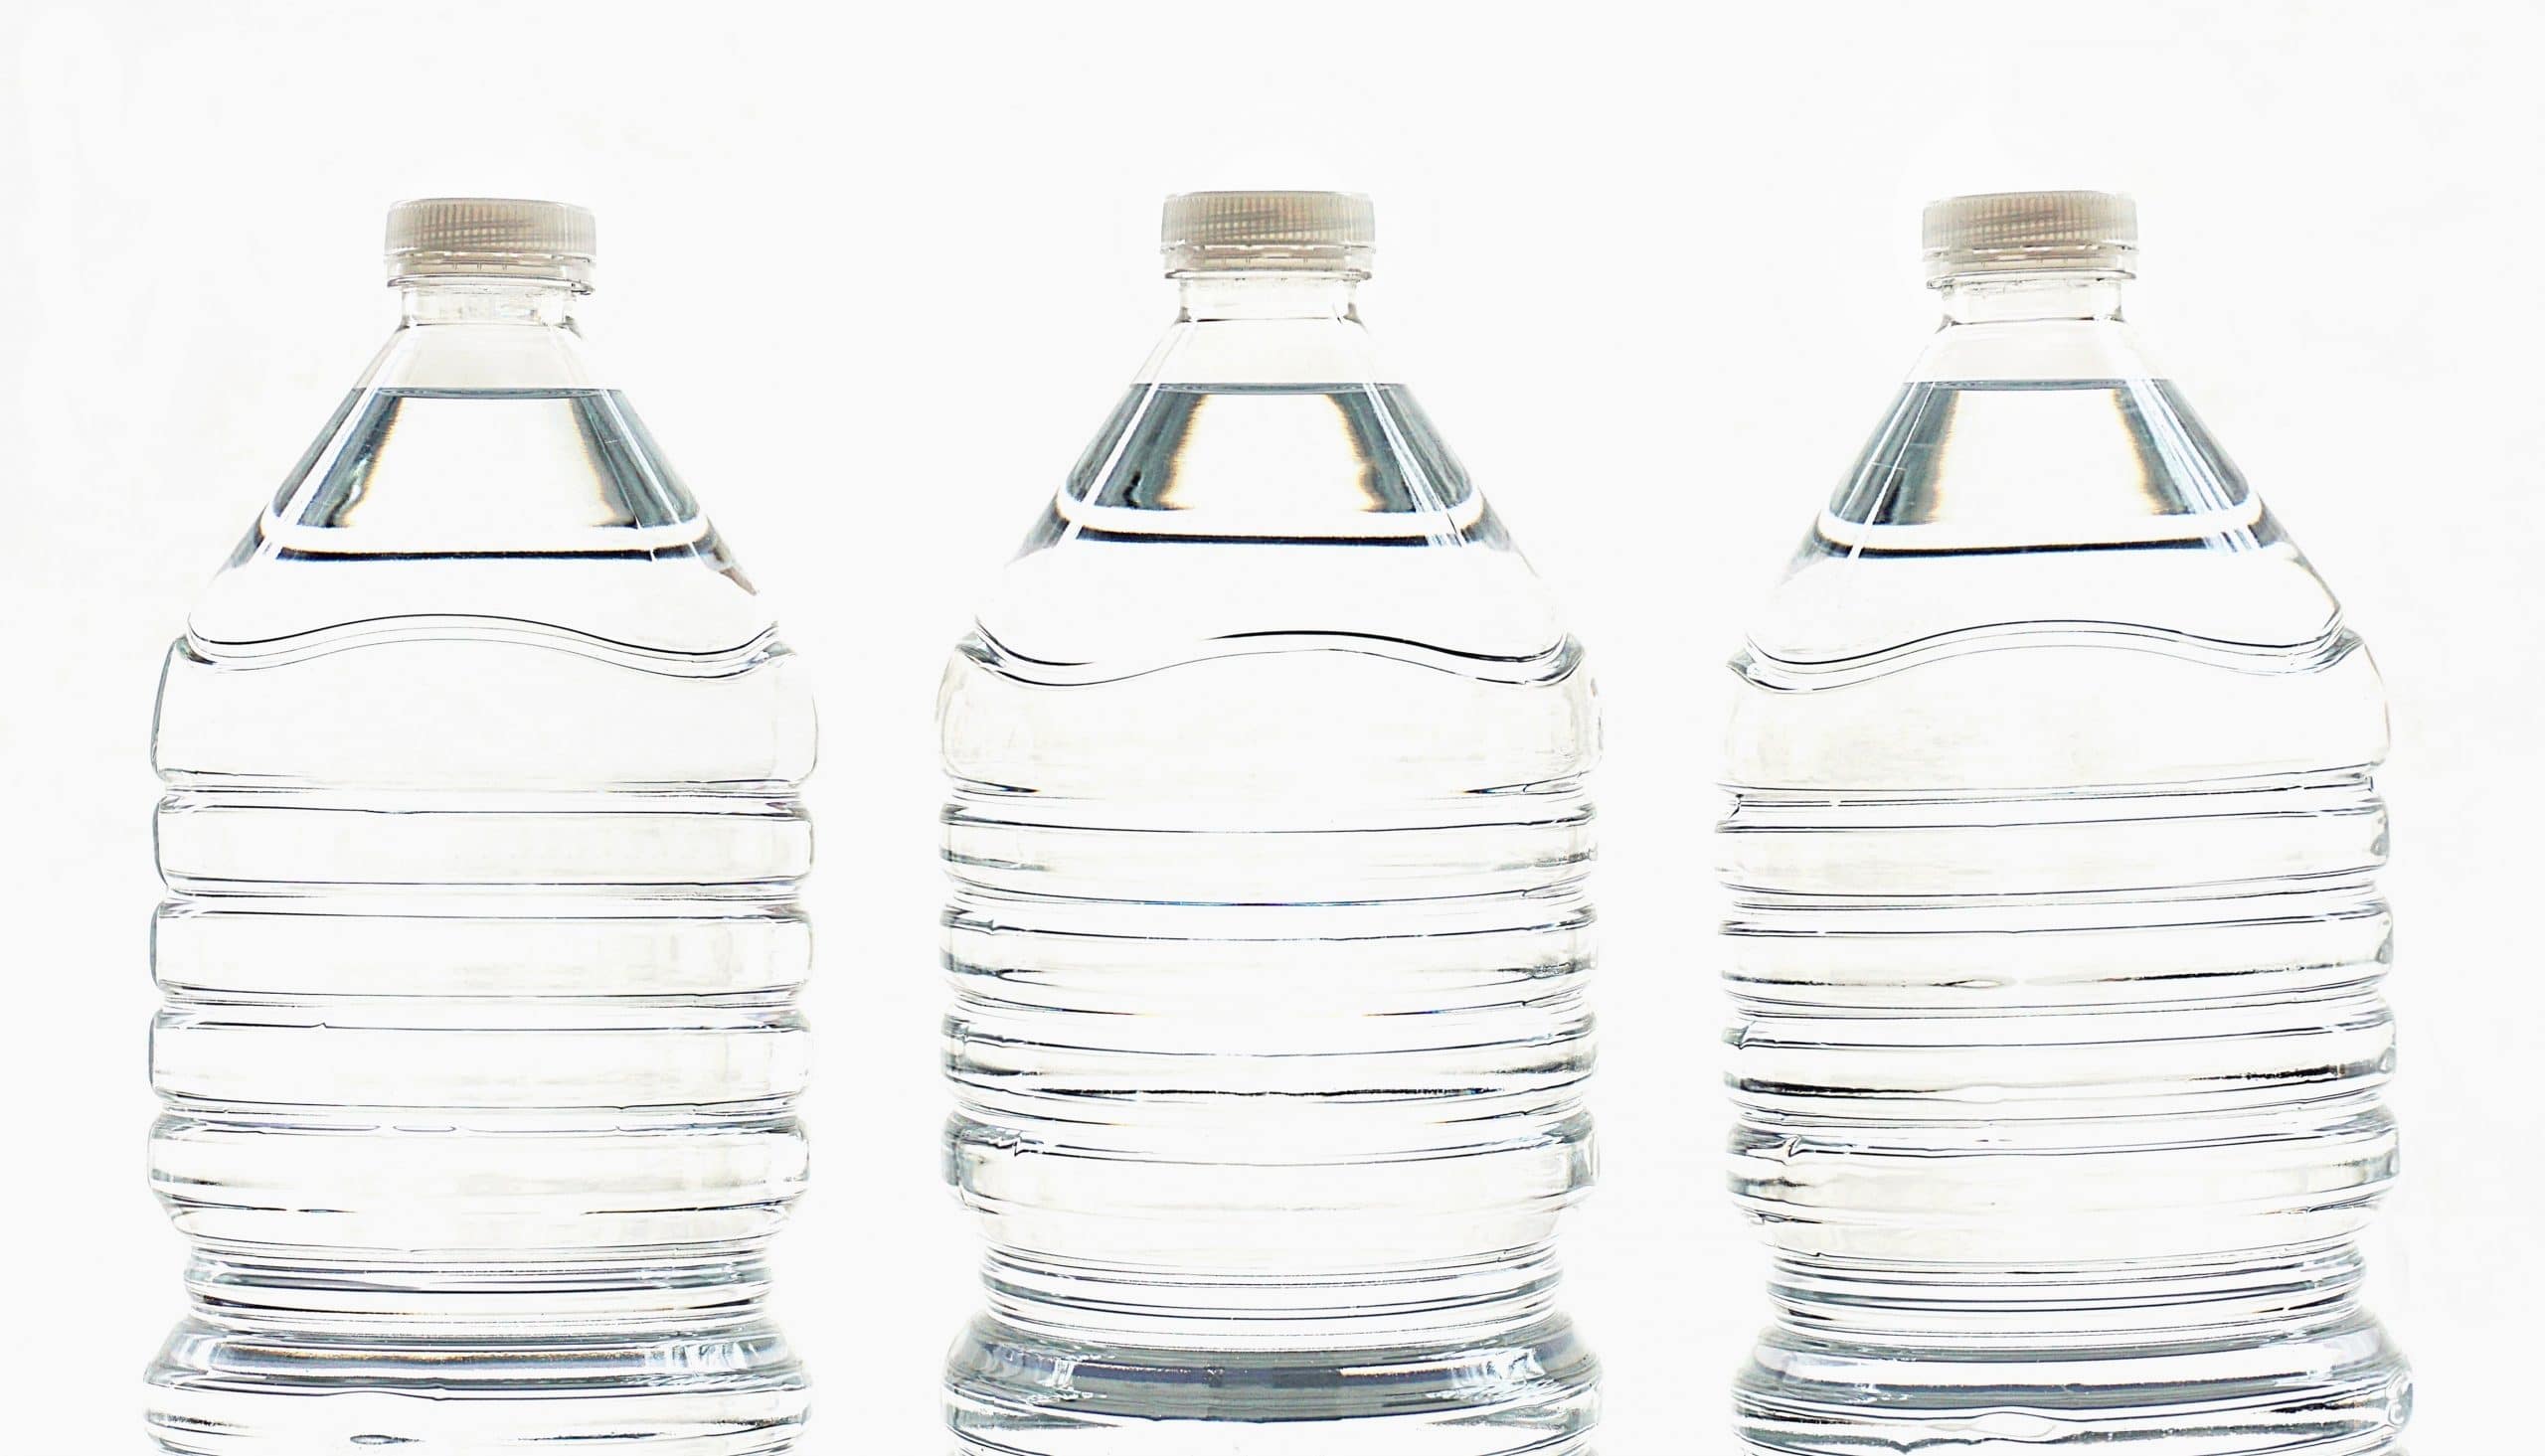 Filled water bottles are item number one in any emergency kit.